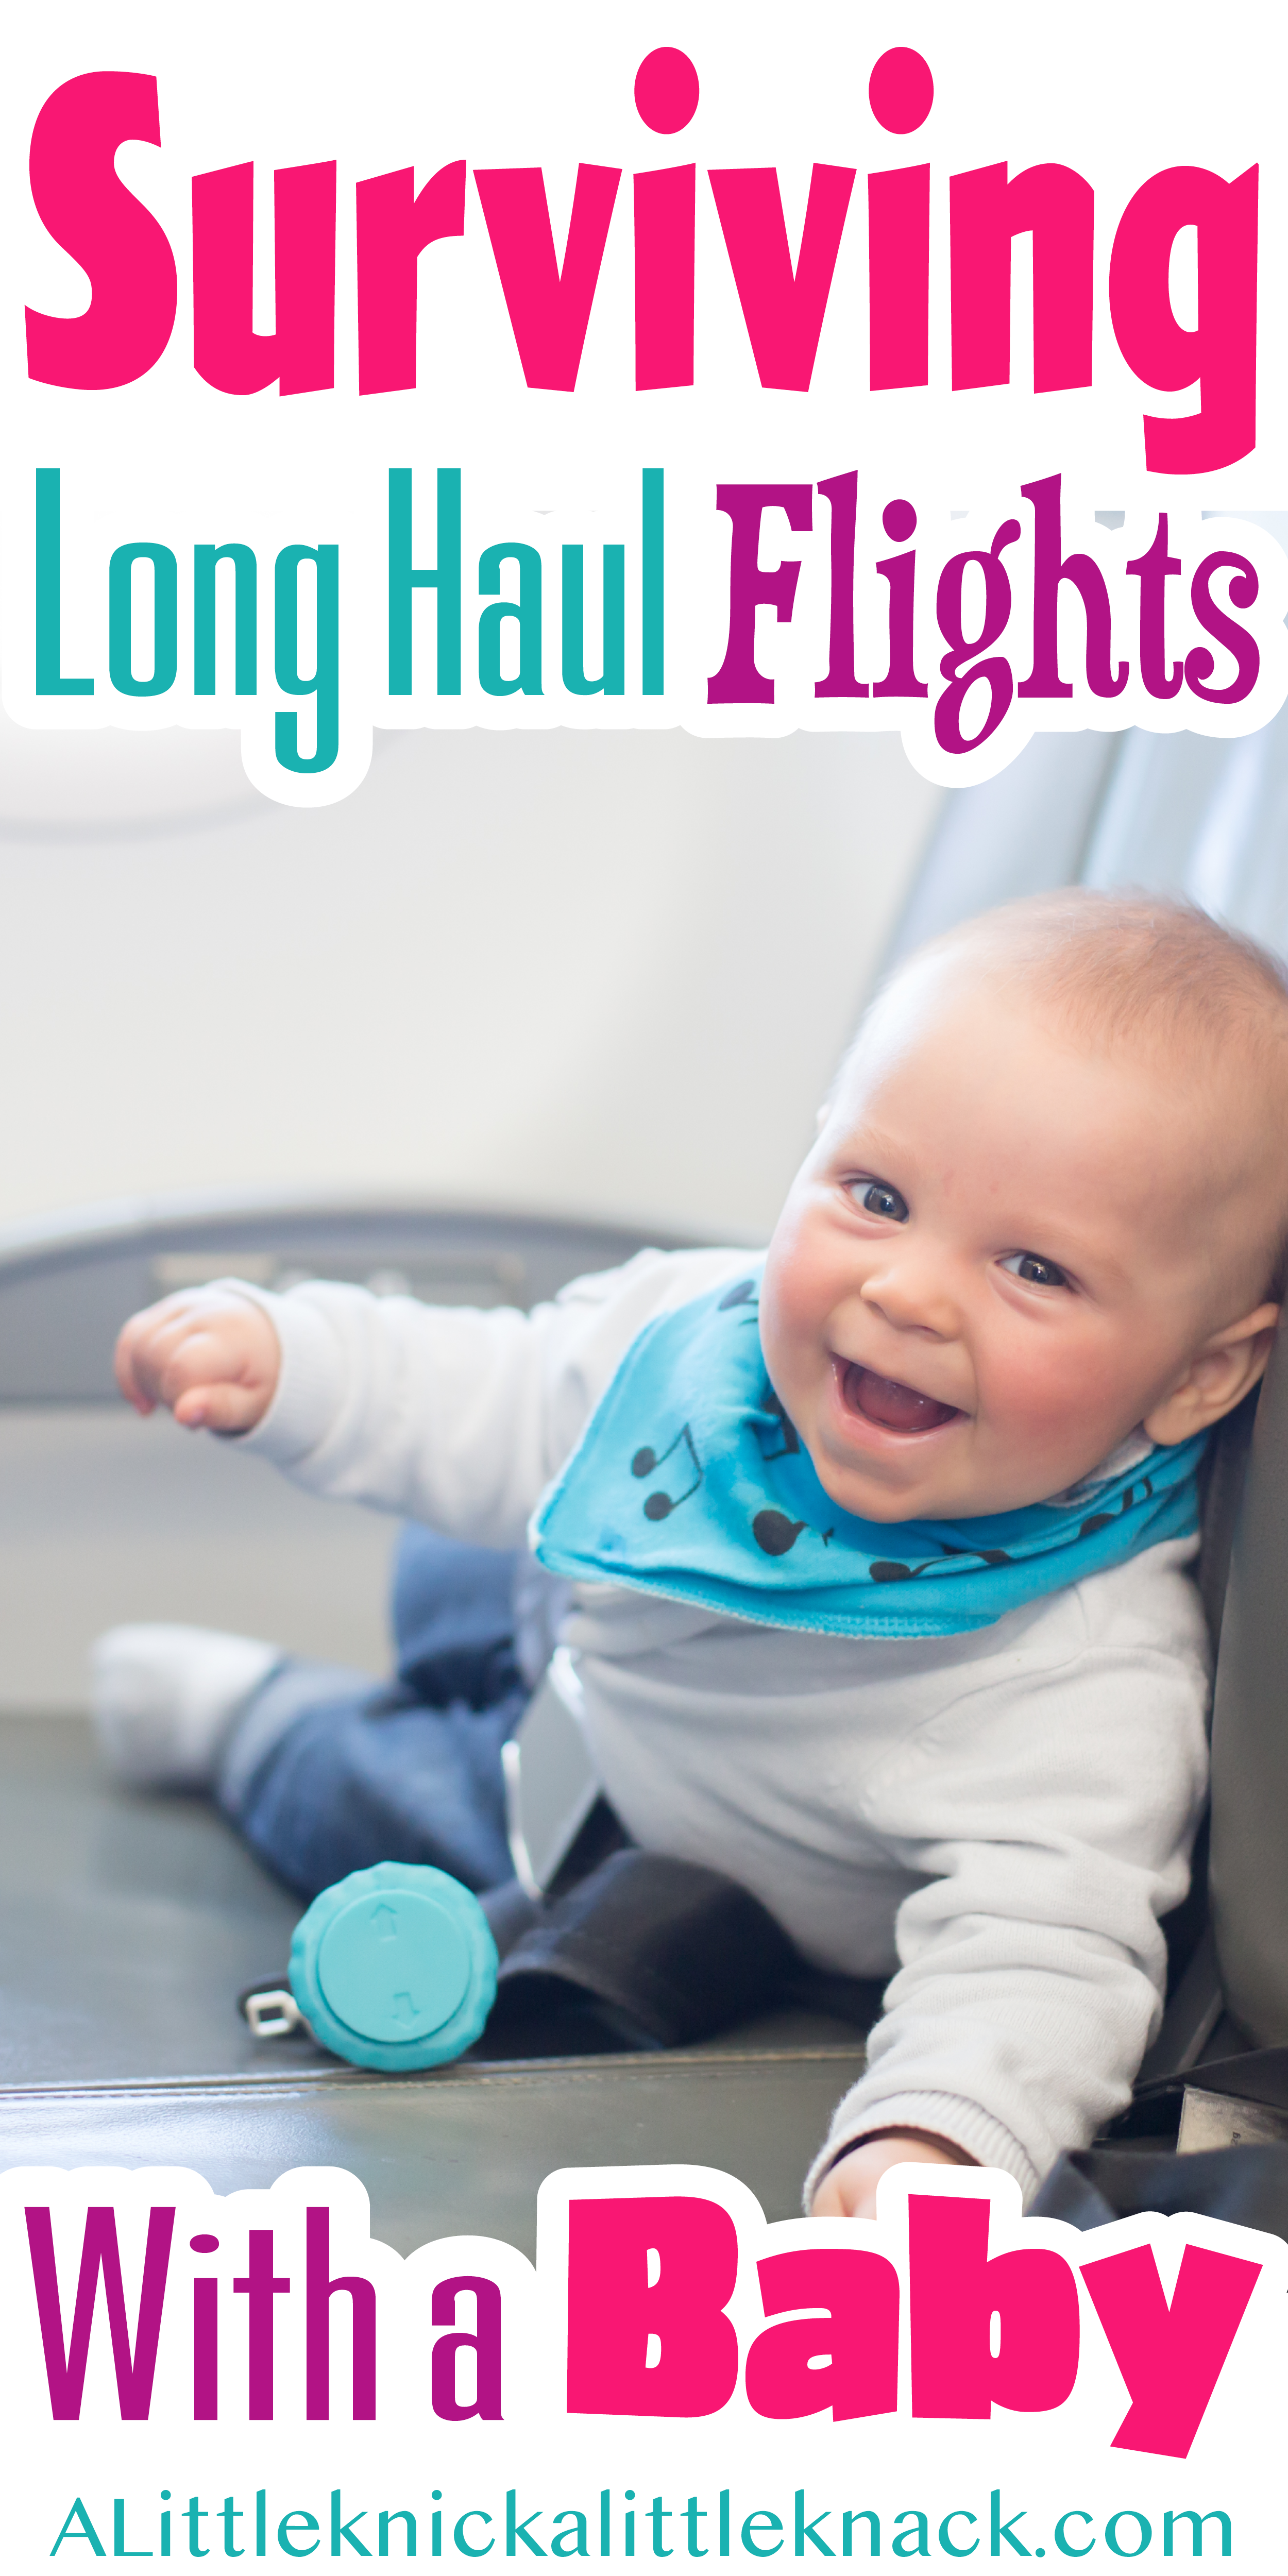 A smiling baby in an airplane seat with a text overlay